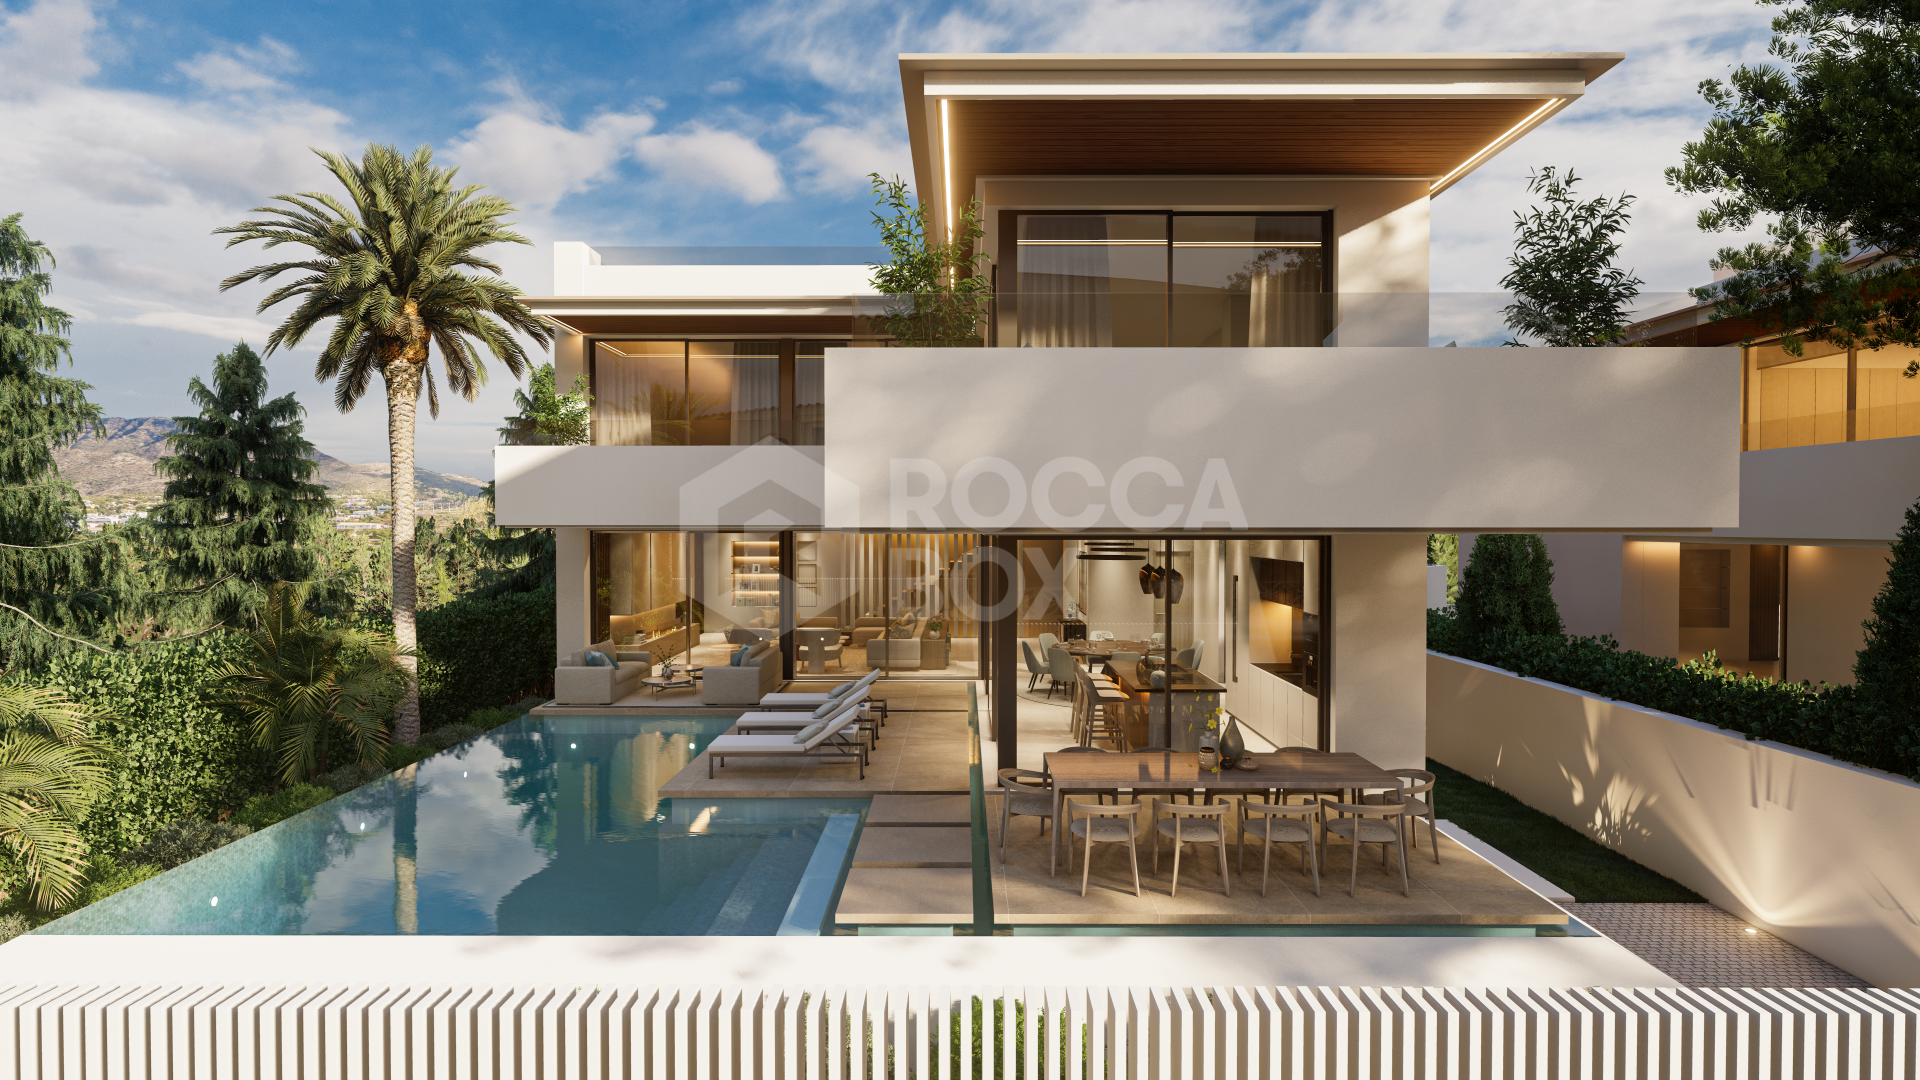 Exclusive project on 4 levels in the privileged location of Cortijo Blanco, 200 metre stroll to the beach and a short distance from Puerto Banús and Marbella.